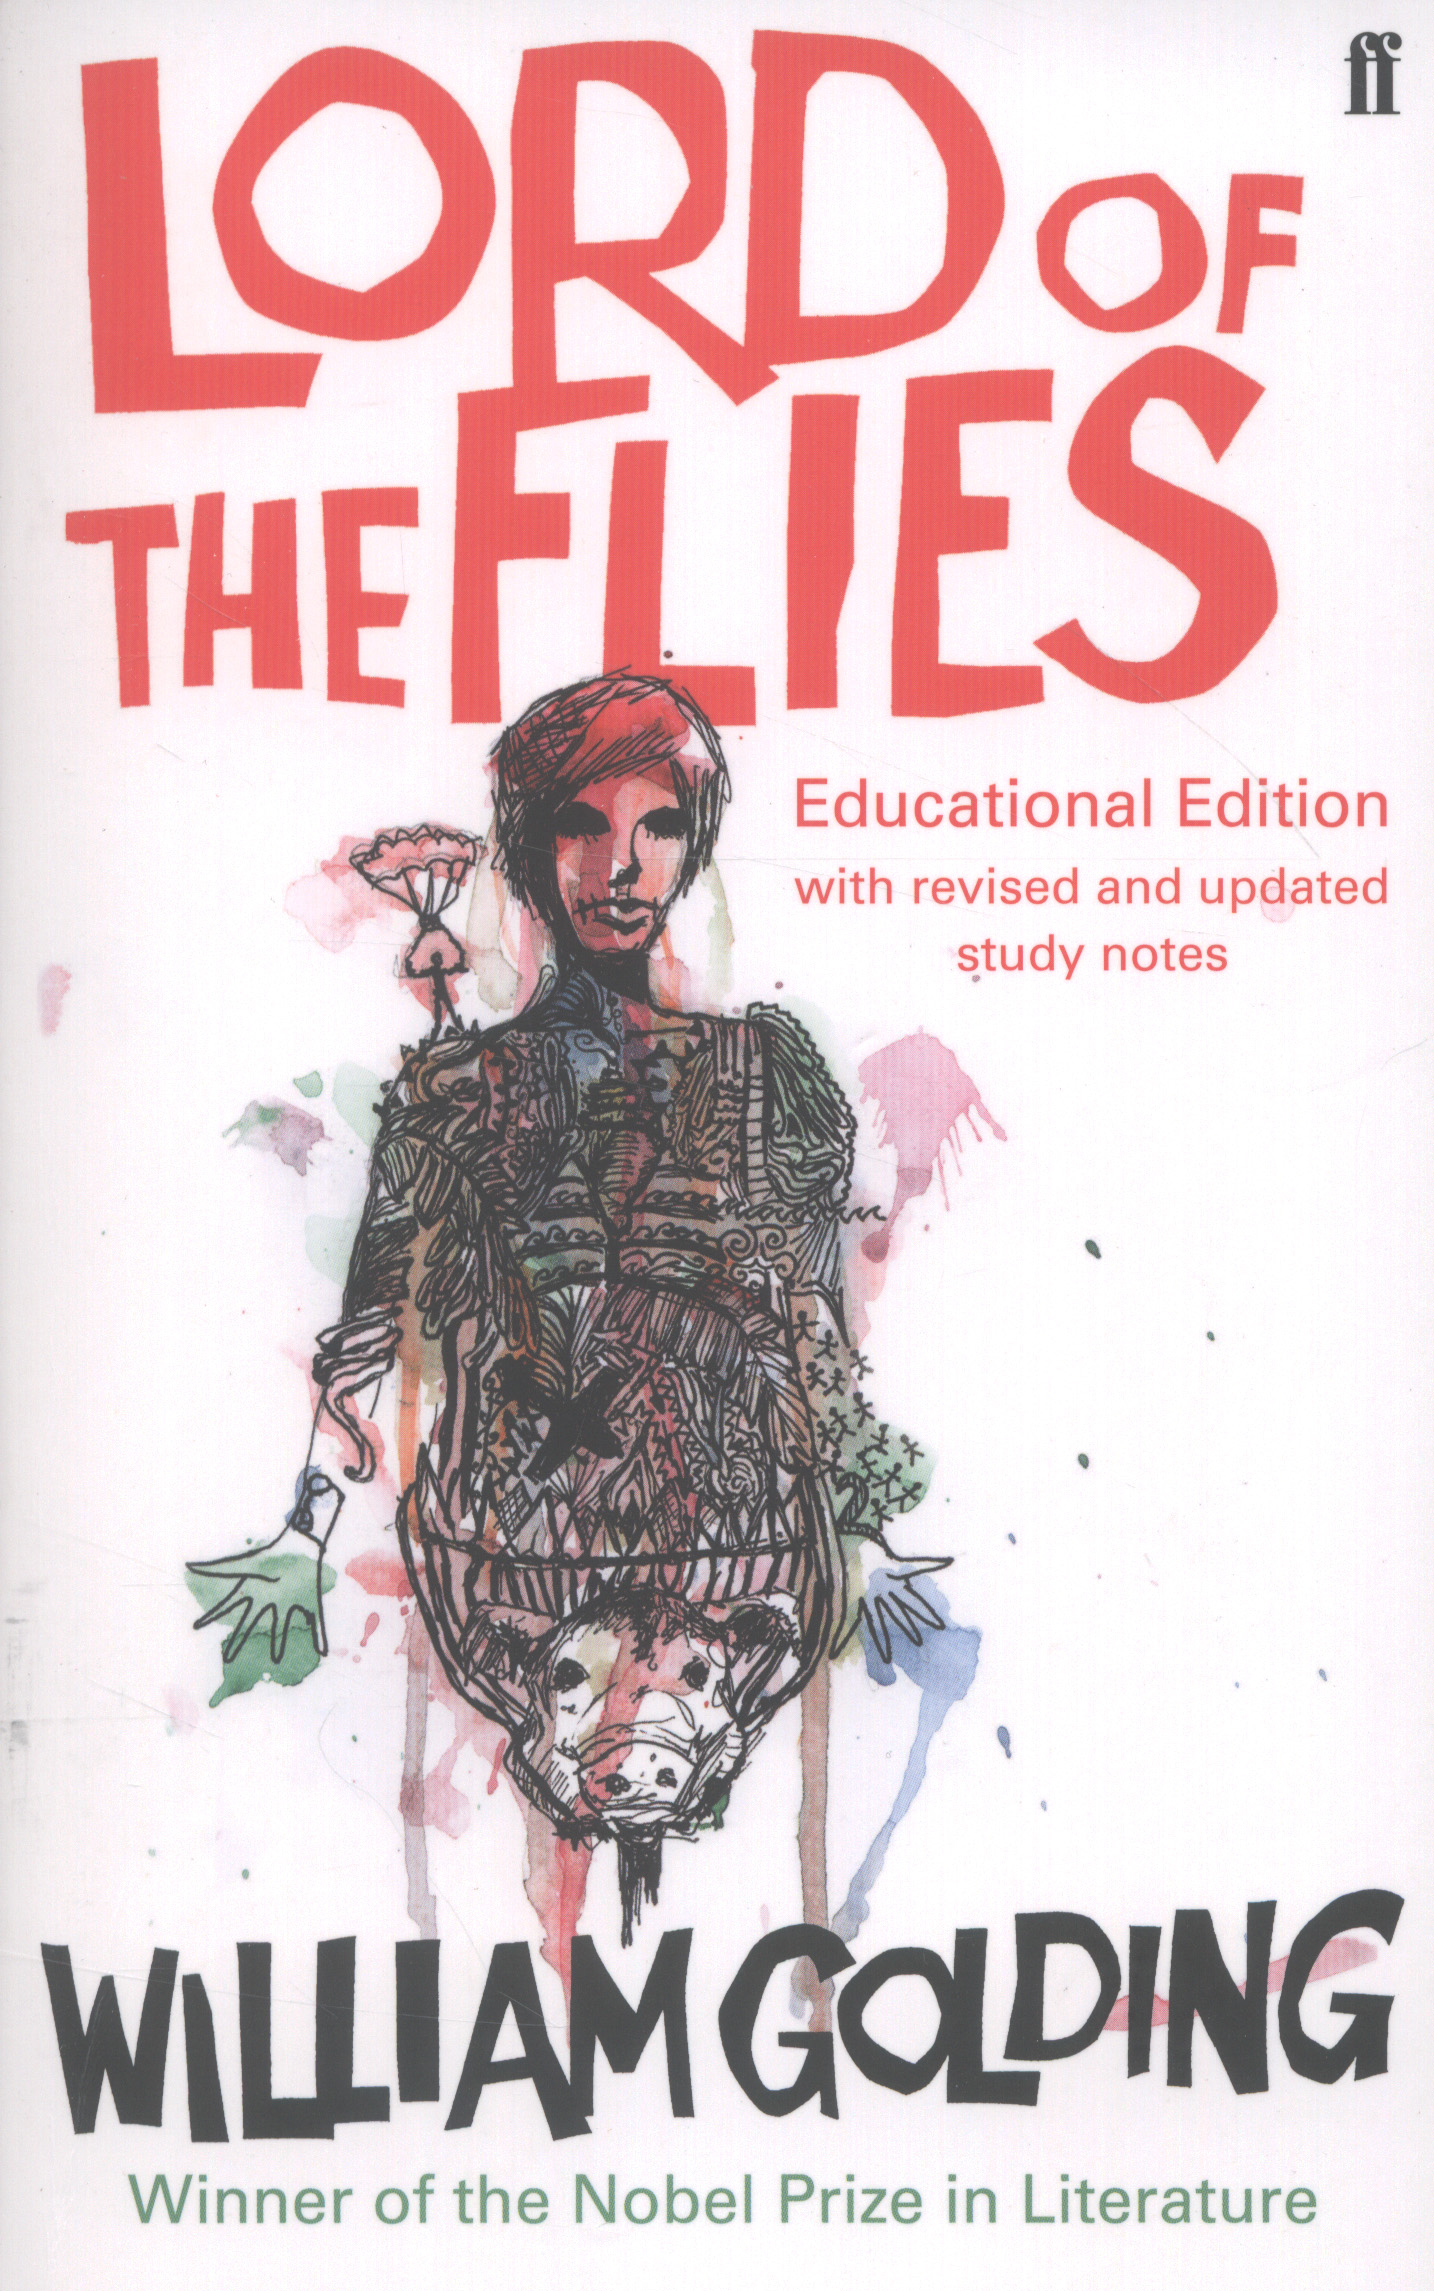 book review on the lord of flies